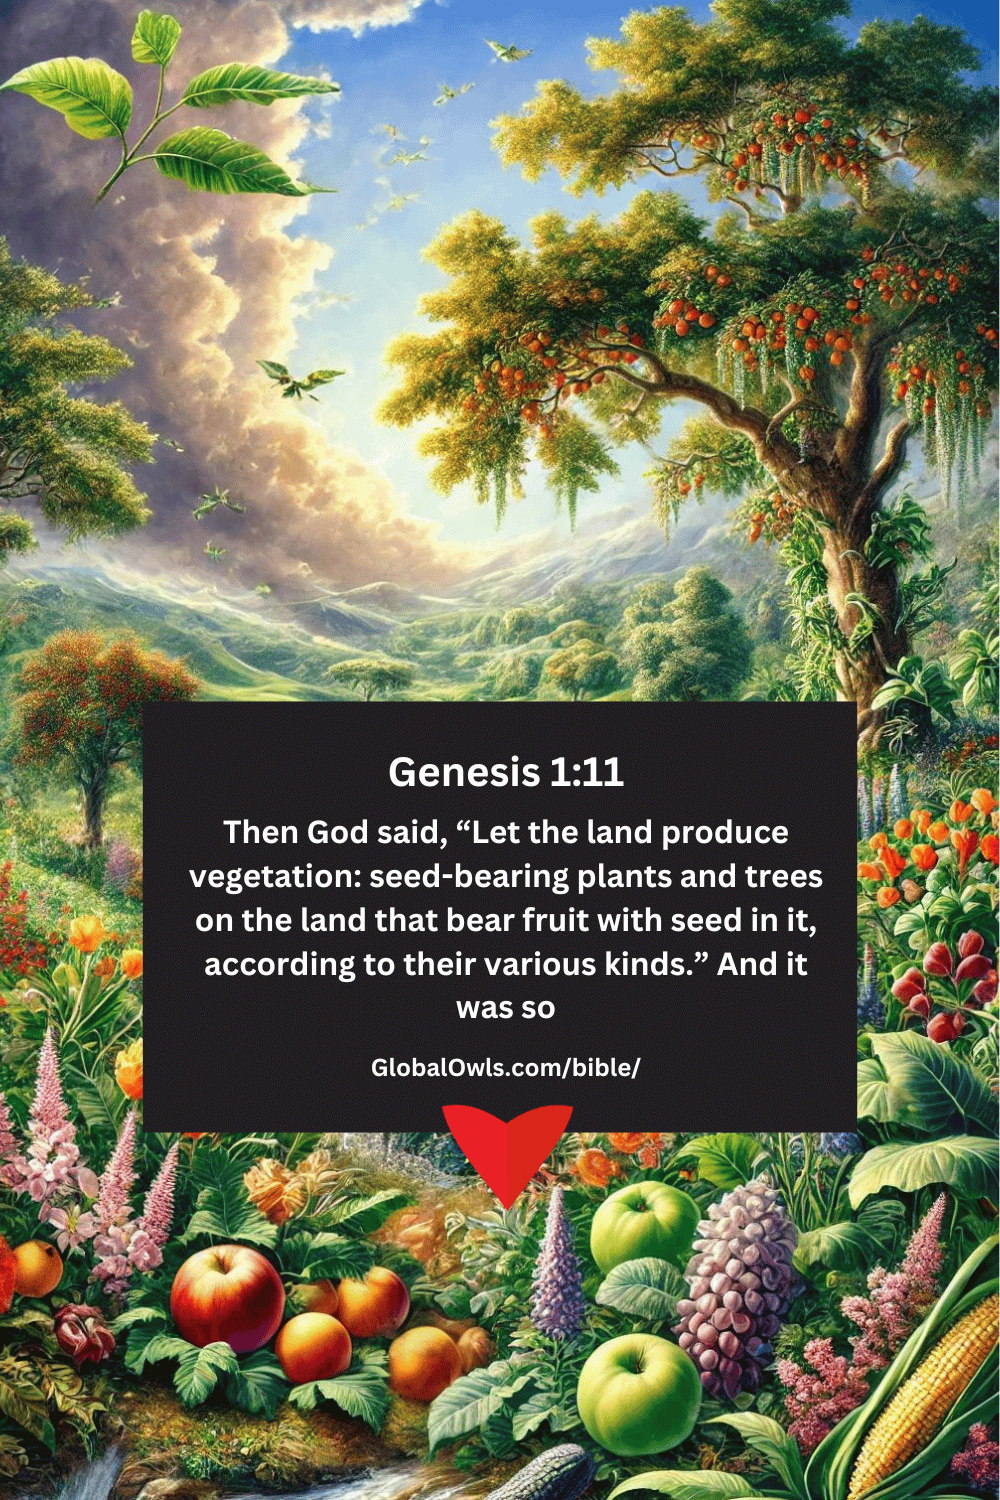 Genesis 1-11 Then God said, “Let the land produce vegetation seed-bearing plants and trees on the land that bear fruit with seed in it, according to their various kinds.” And it was so